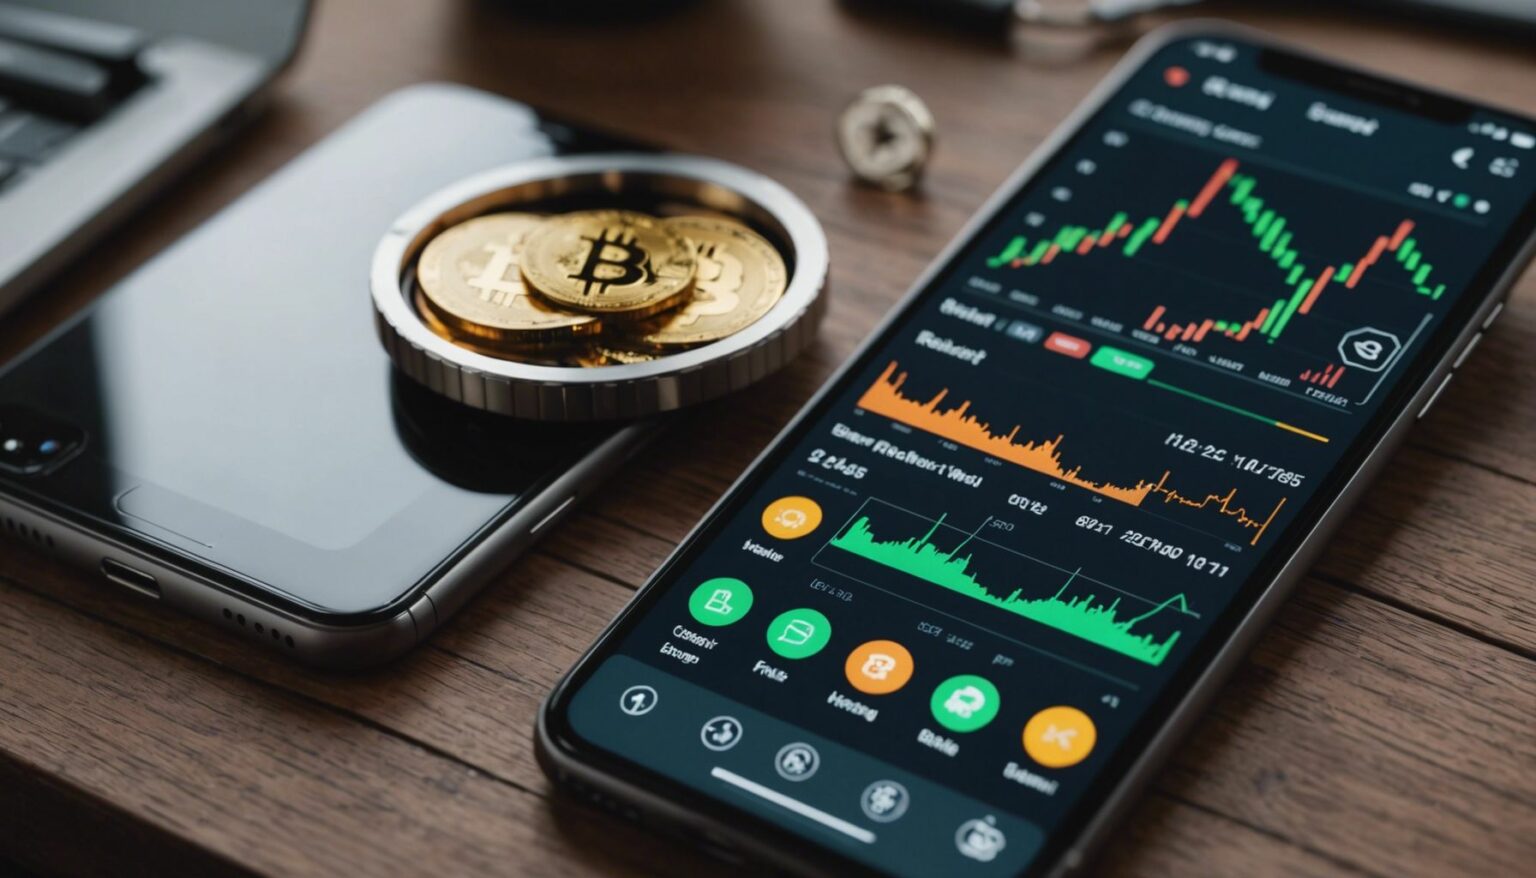 Smartphone showing cryptocurrency trading app interface with charts and trading options.